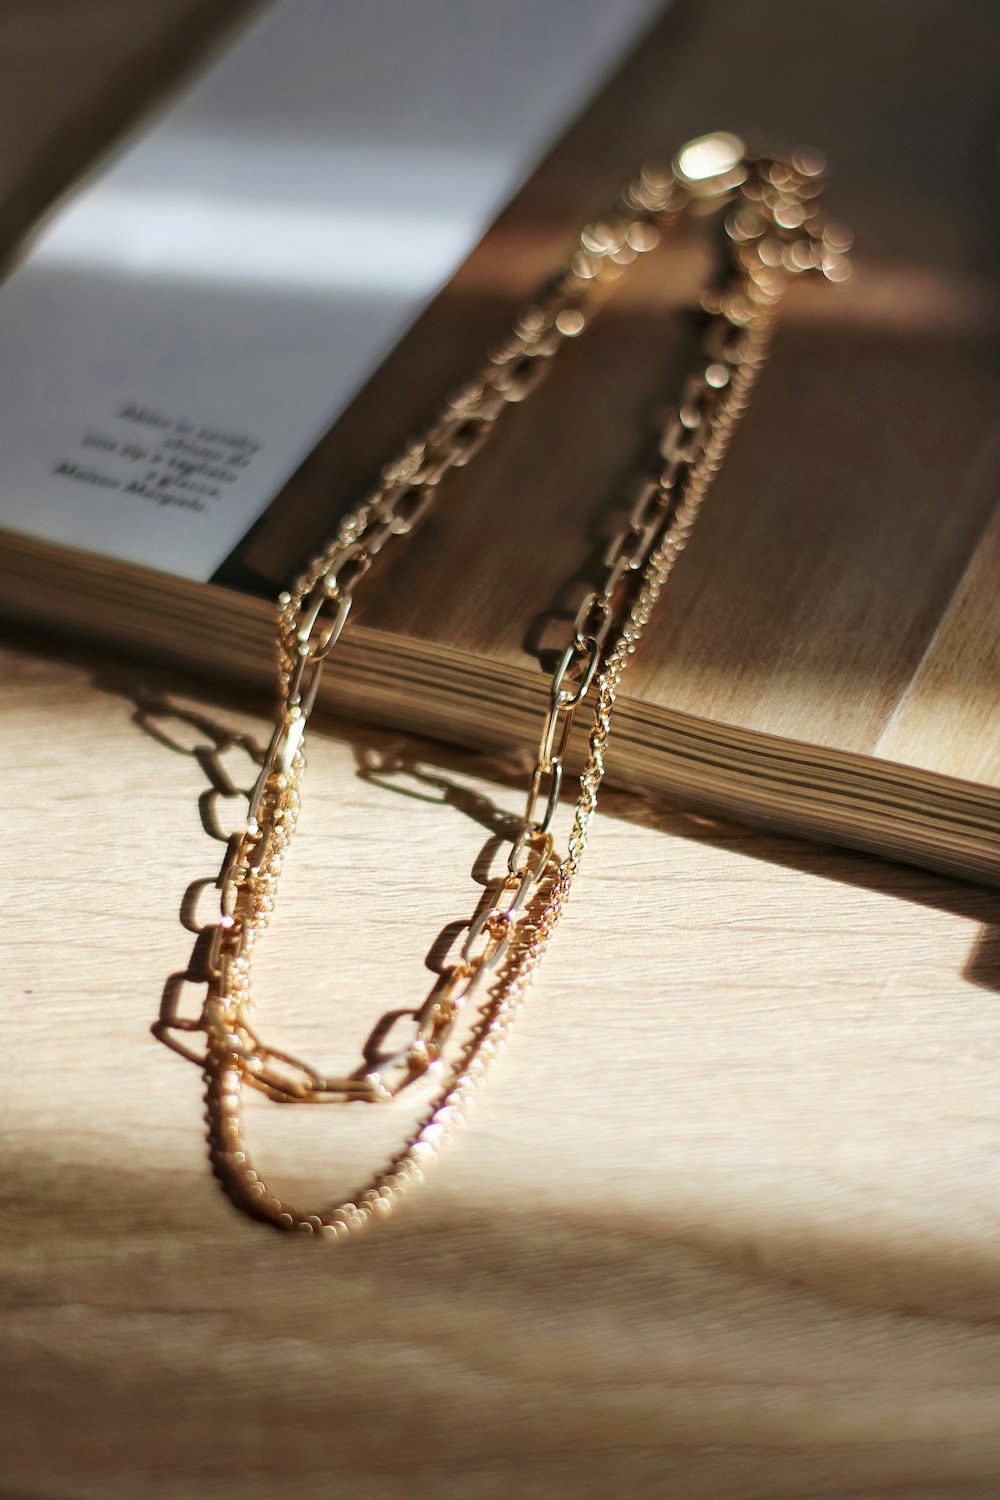 a close up of a book with a chain on it